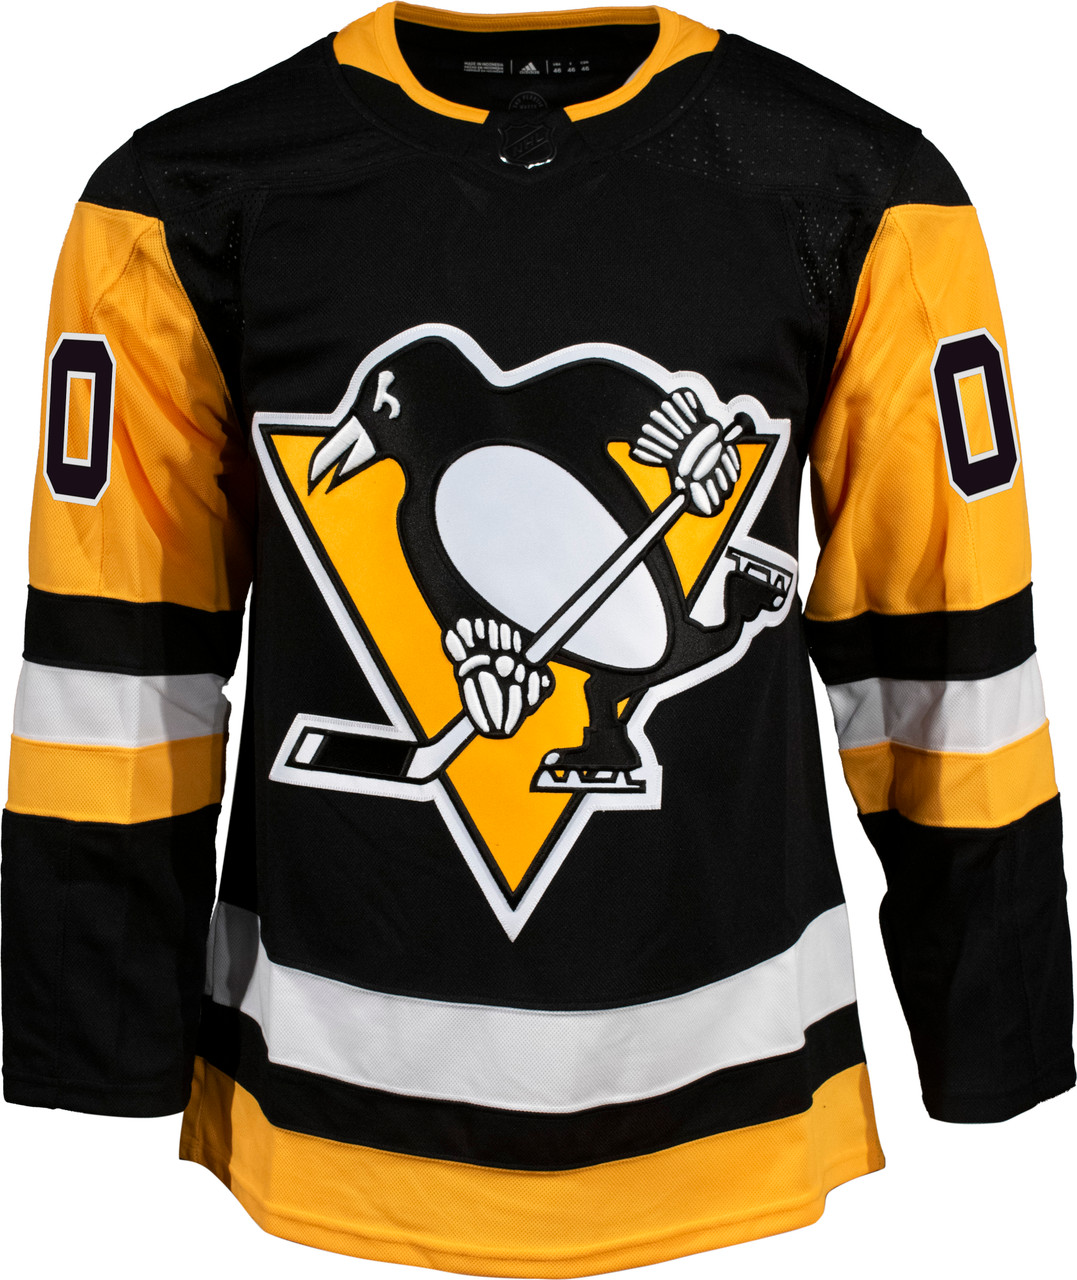 adidas Men's Custom Pittsburgh Penguins Authentic Pro Home Jersey